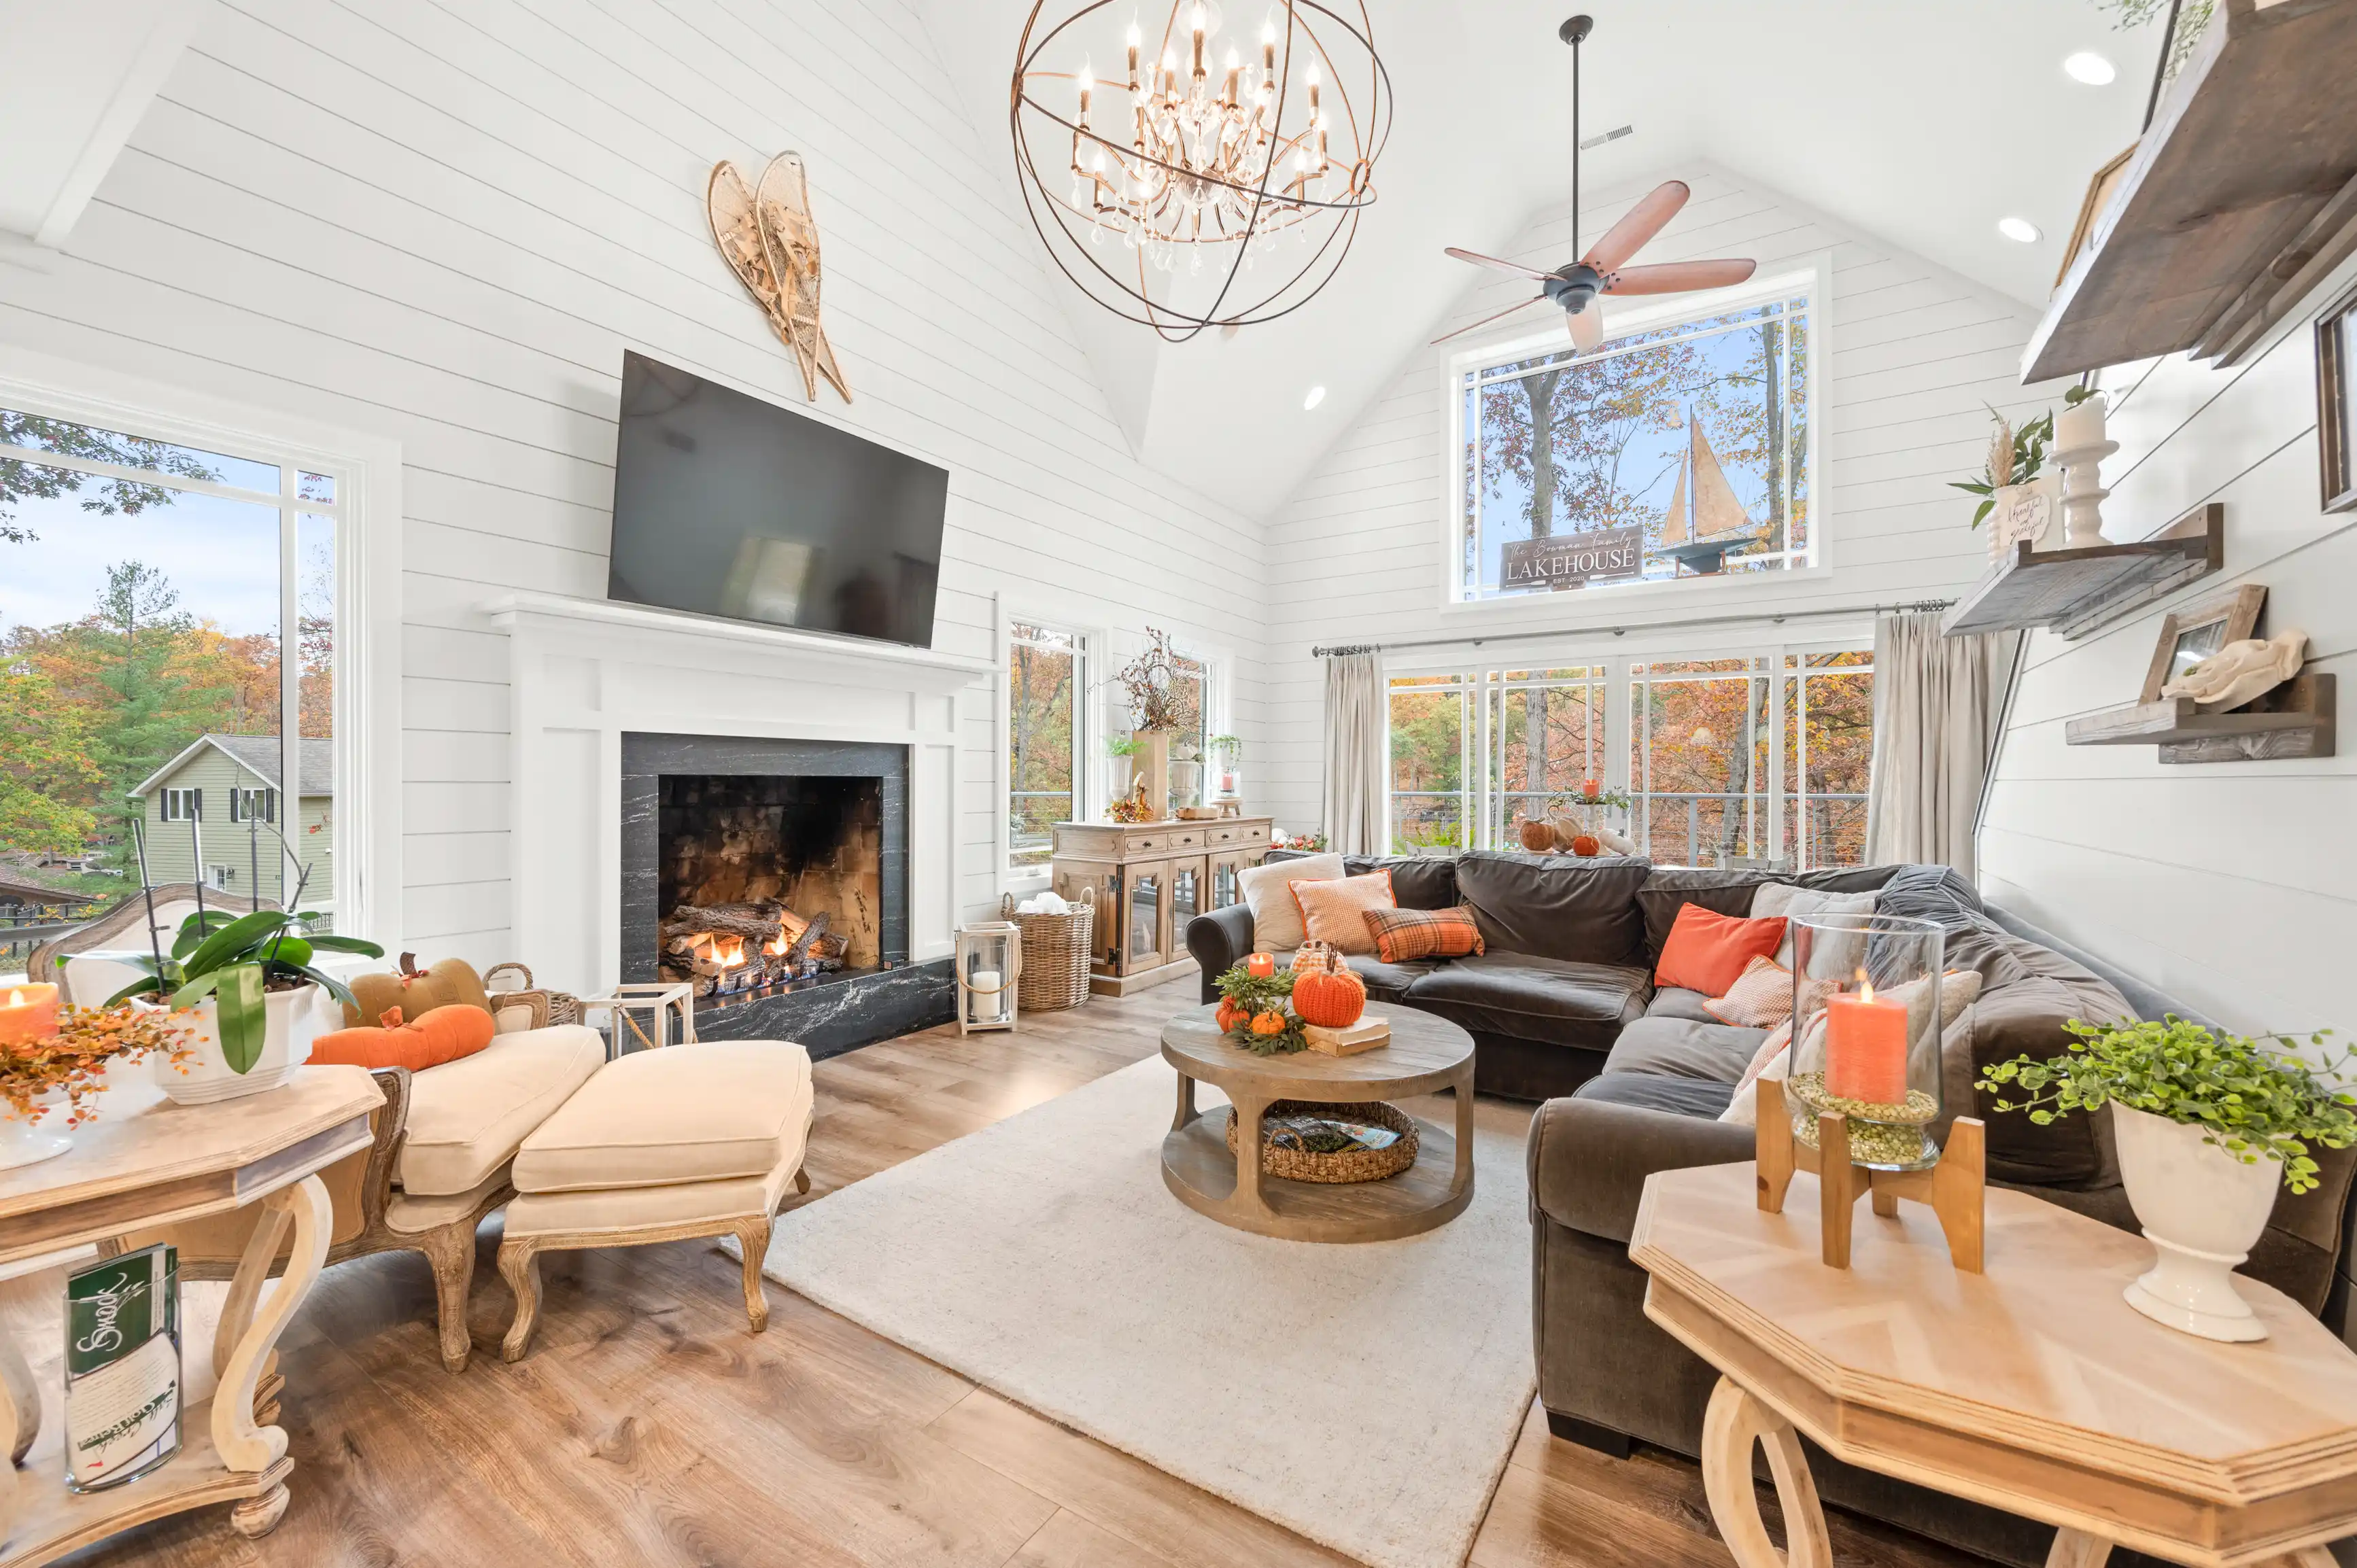 Bright and cozy living room interior with a lit fireplace, comfortable furniture, and large windows overlooking autumn foliage.